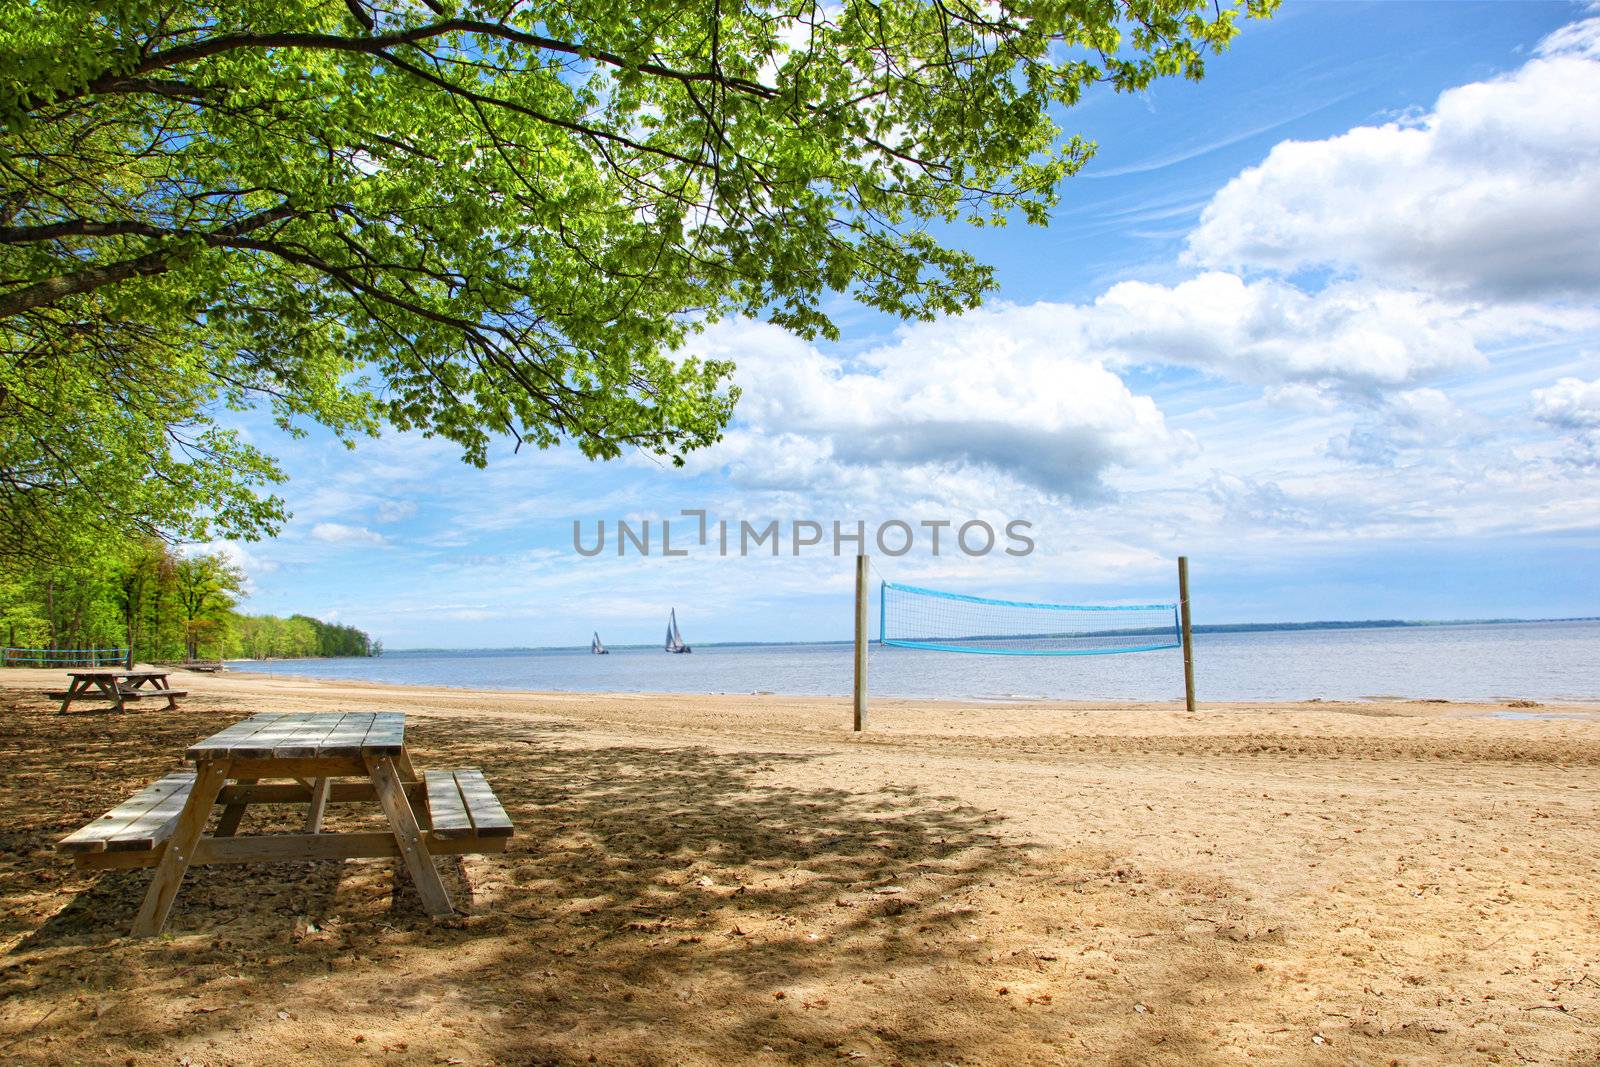 Picnic tables at the beach on a beautiful sunny day